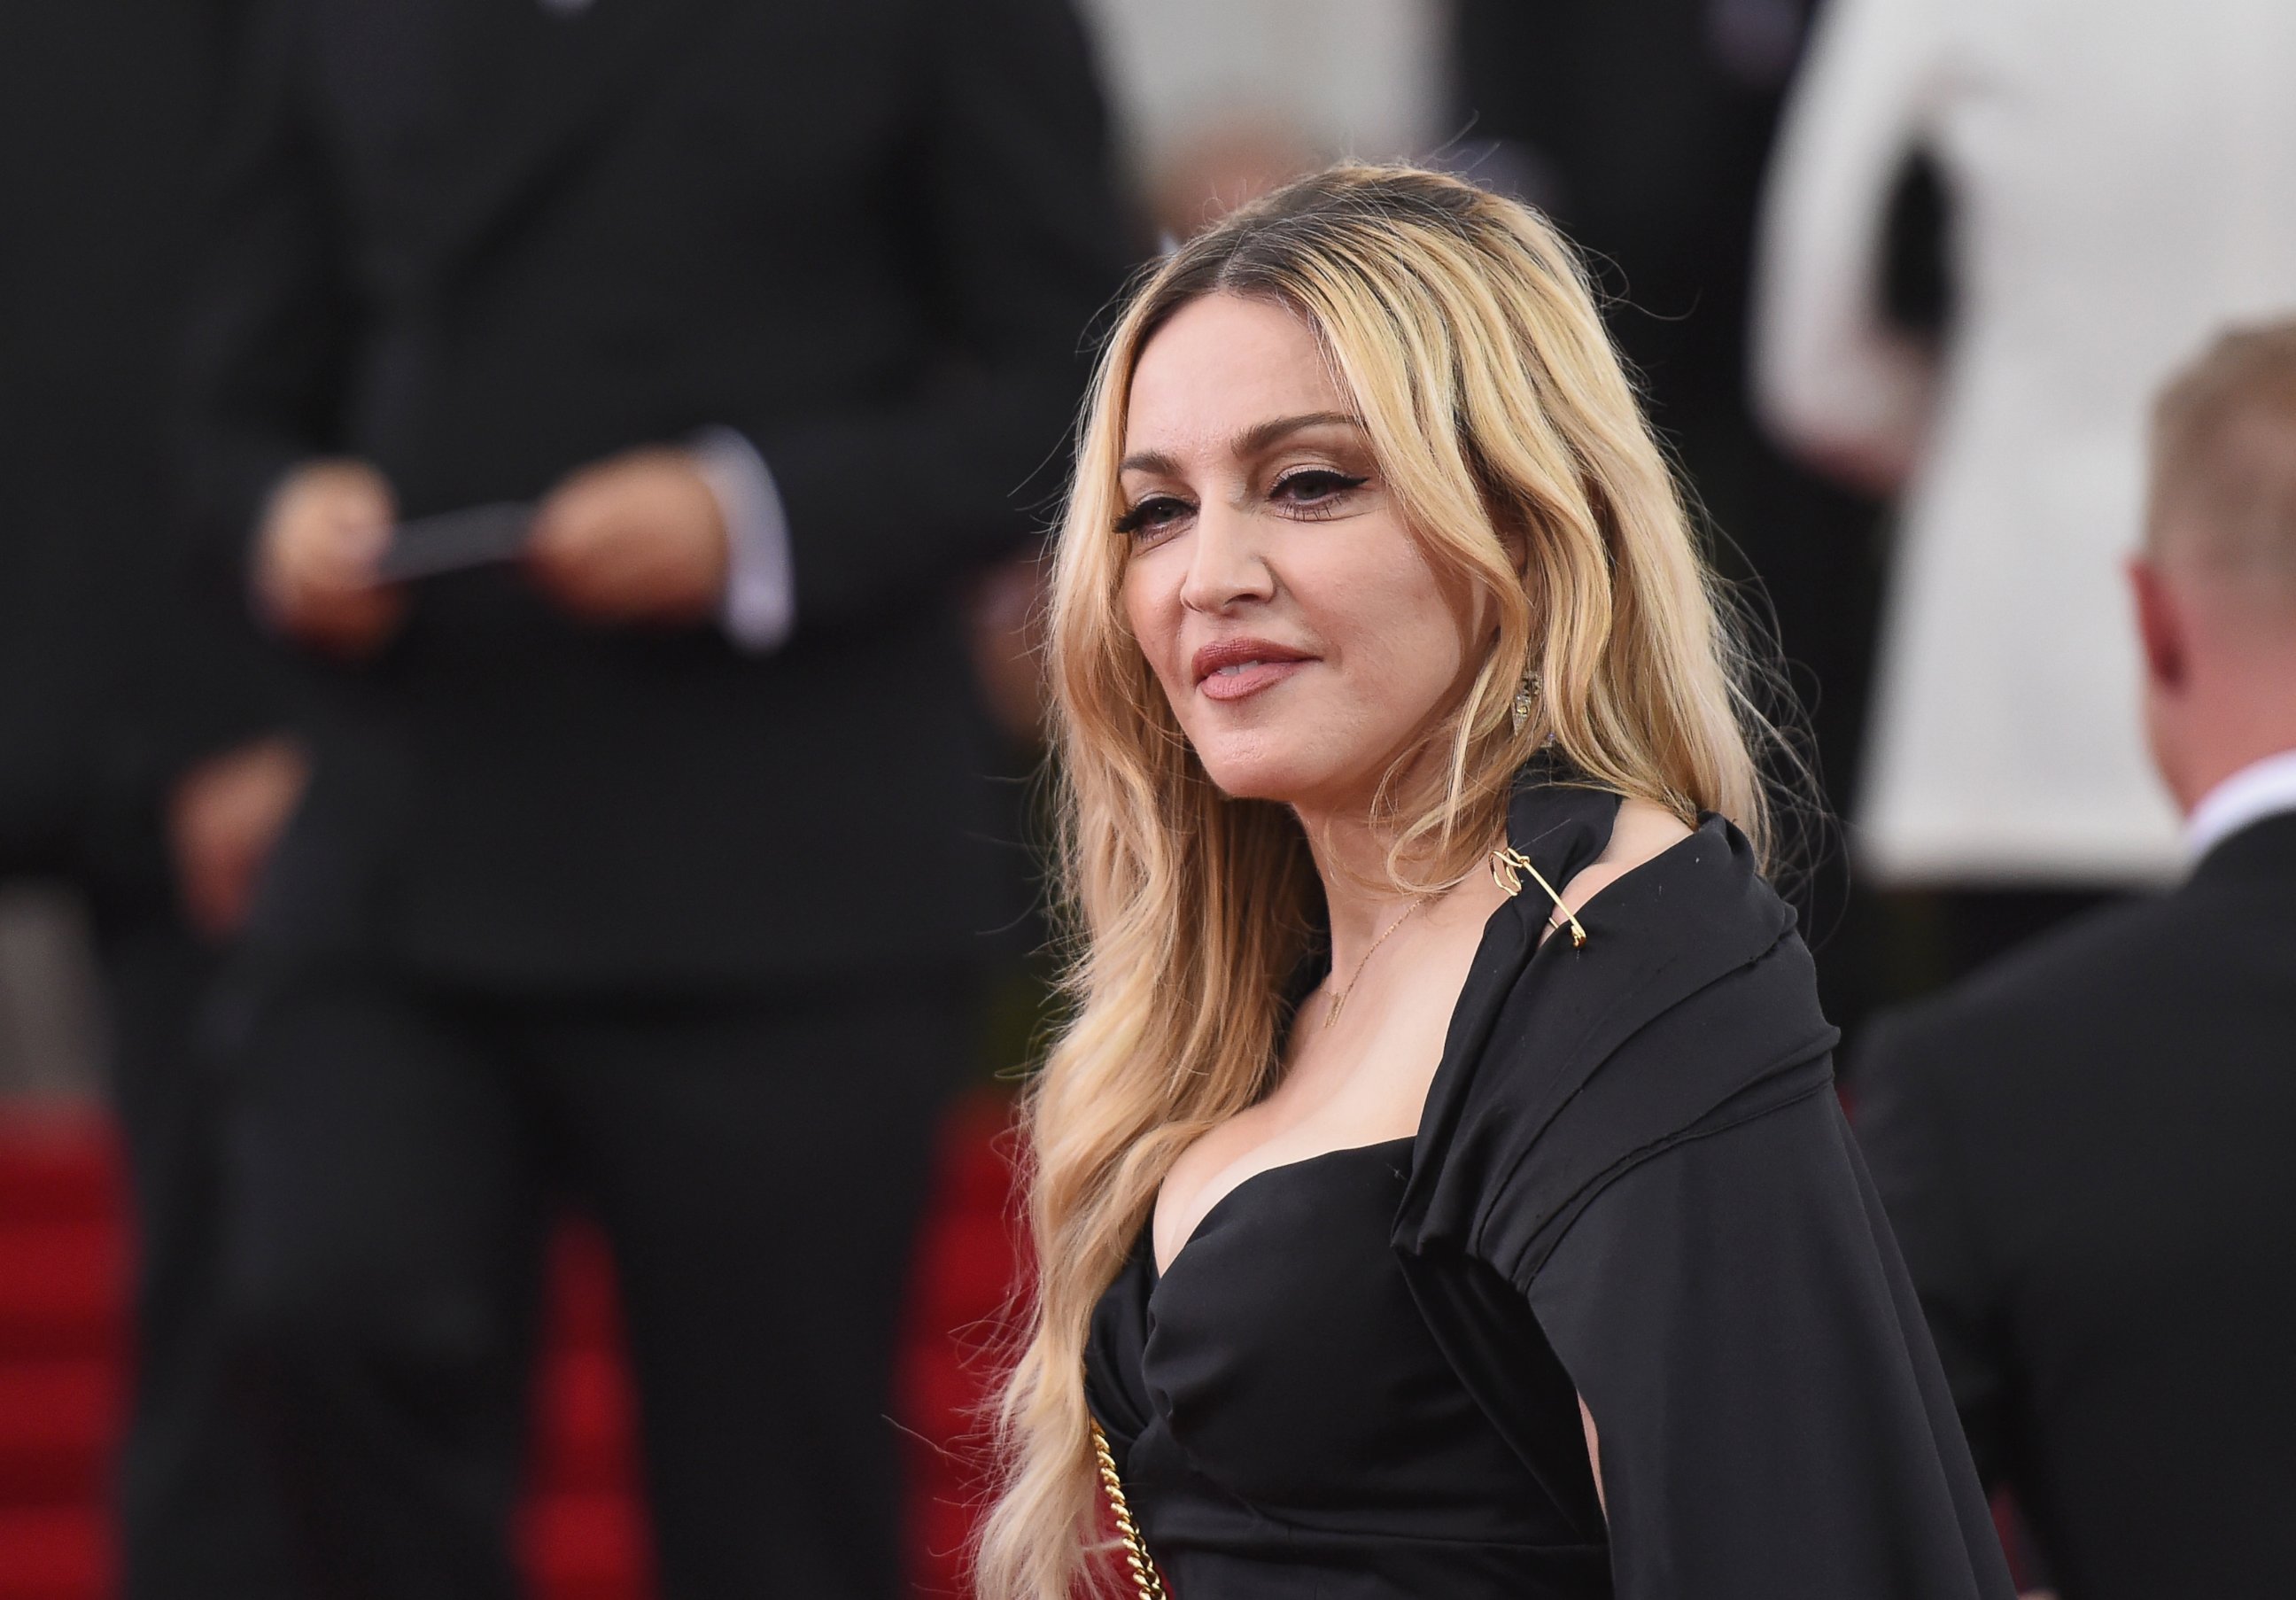 PHOTO: Madonna attends a benefit gala at the Metropolitan Museum of Art on May 4, 2015 in New York.